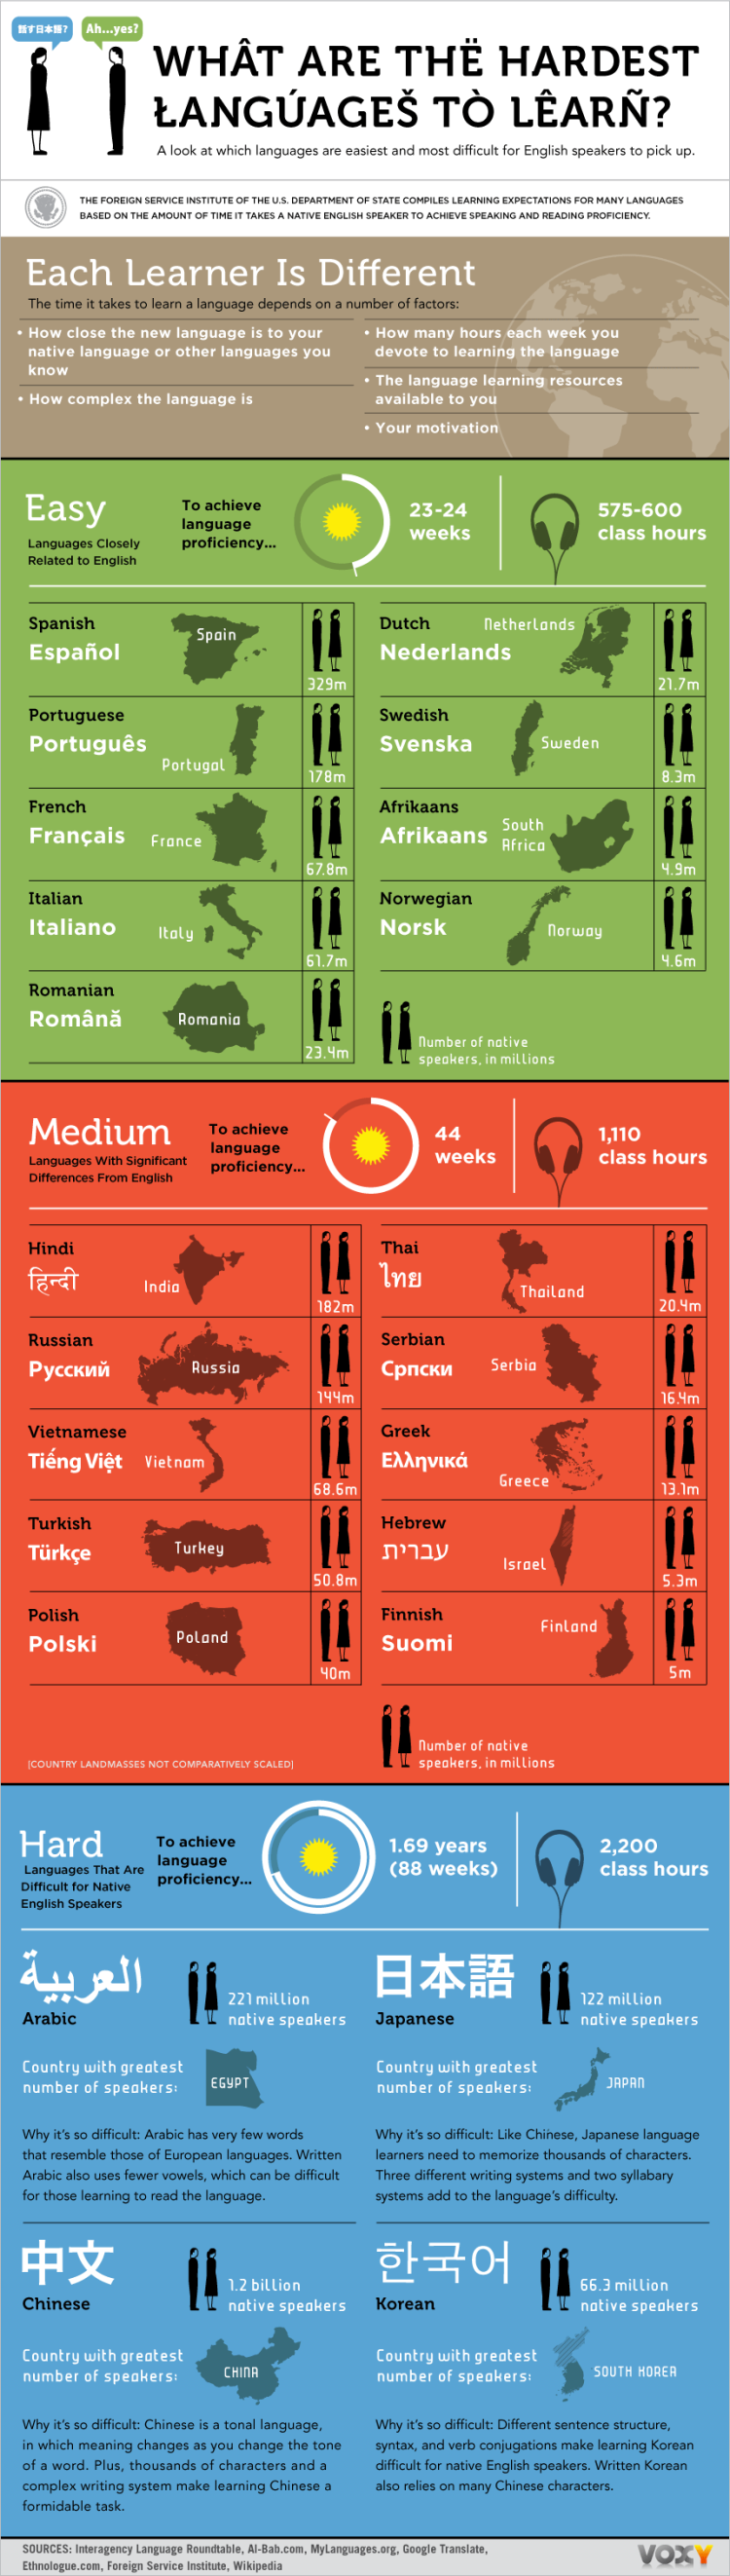 Learning languages infographic